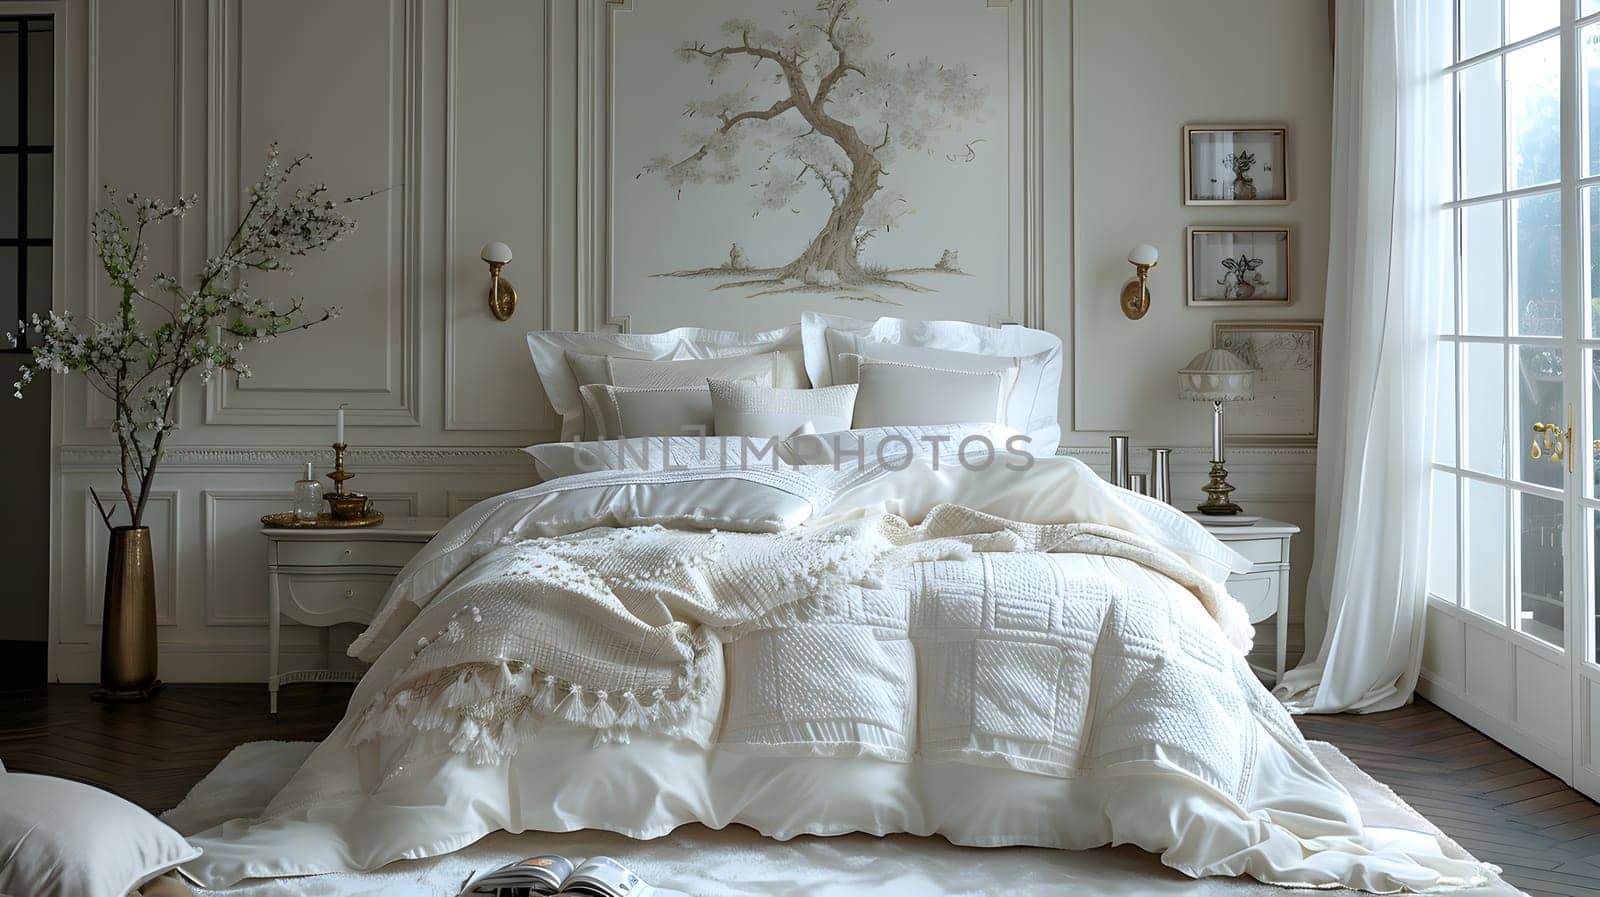 A cozy bedroom in a grey house with wooden flooring, featuring a comfortable bed frame and a window showcasing a tree on the wall